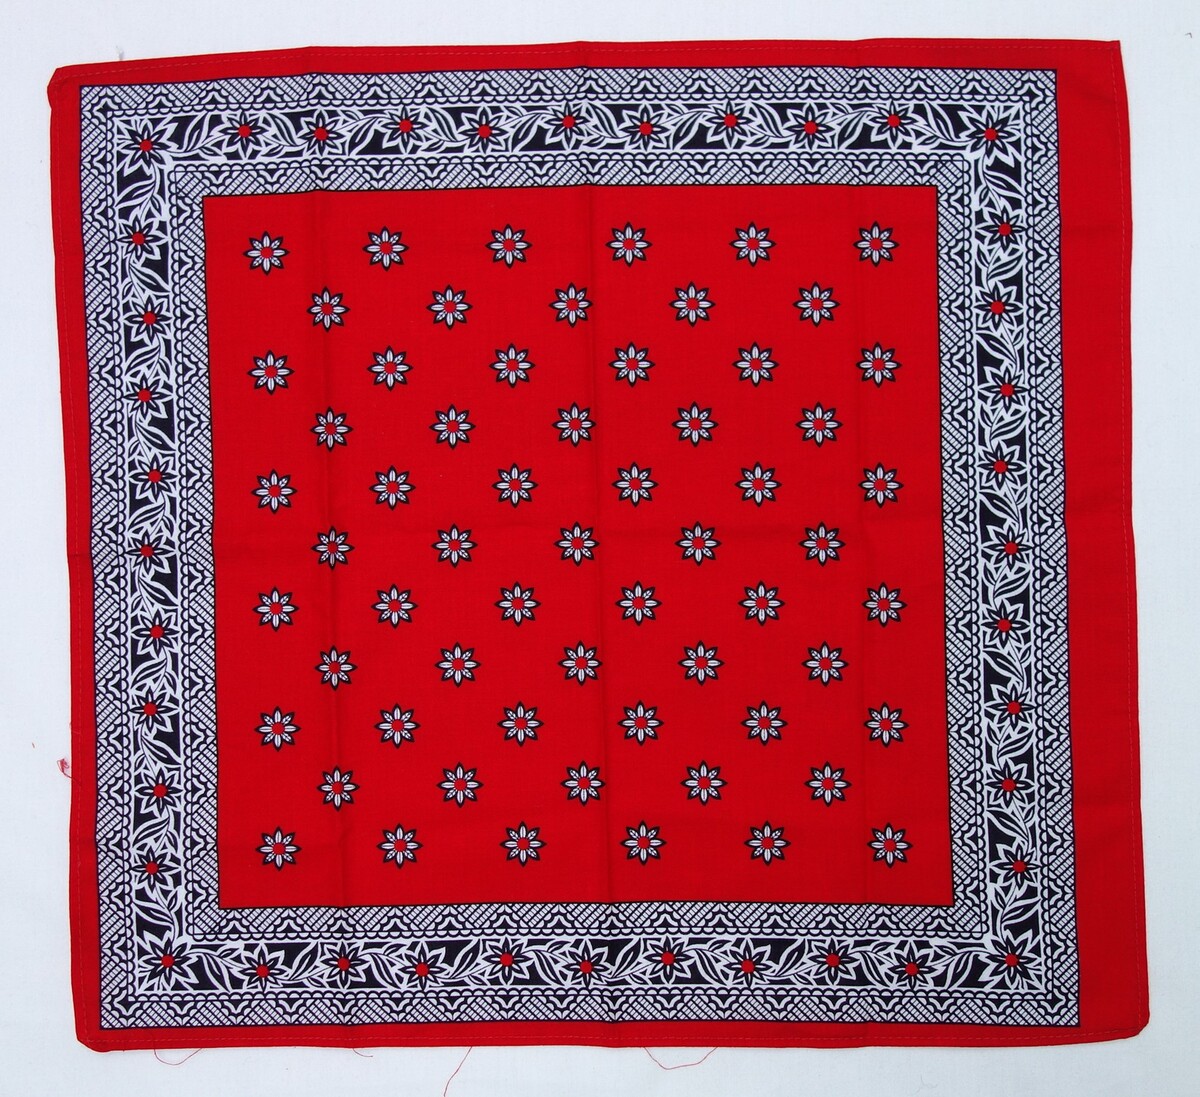 Traditional farmer's kerchief from the Netherlands, now used as a symbol of anti-government protests (TRC 2019.1998).